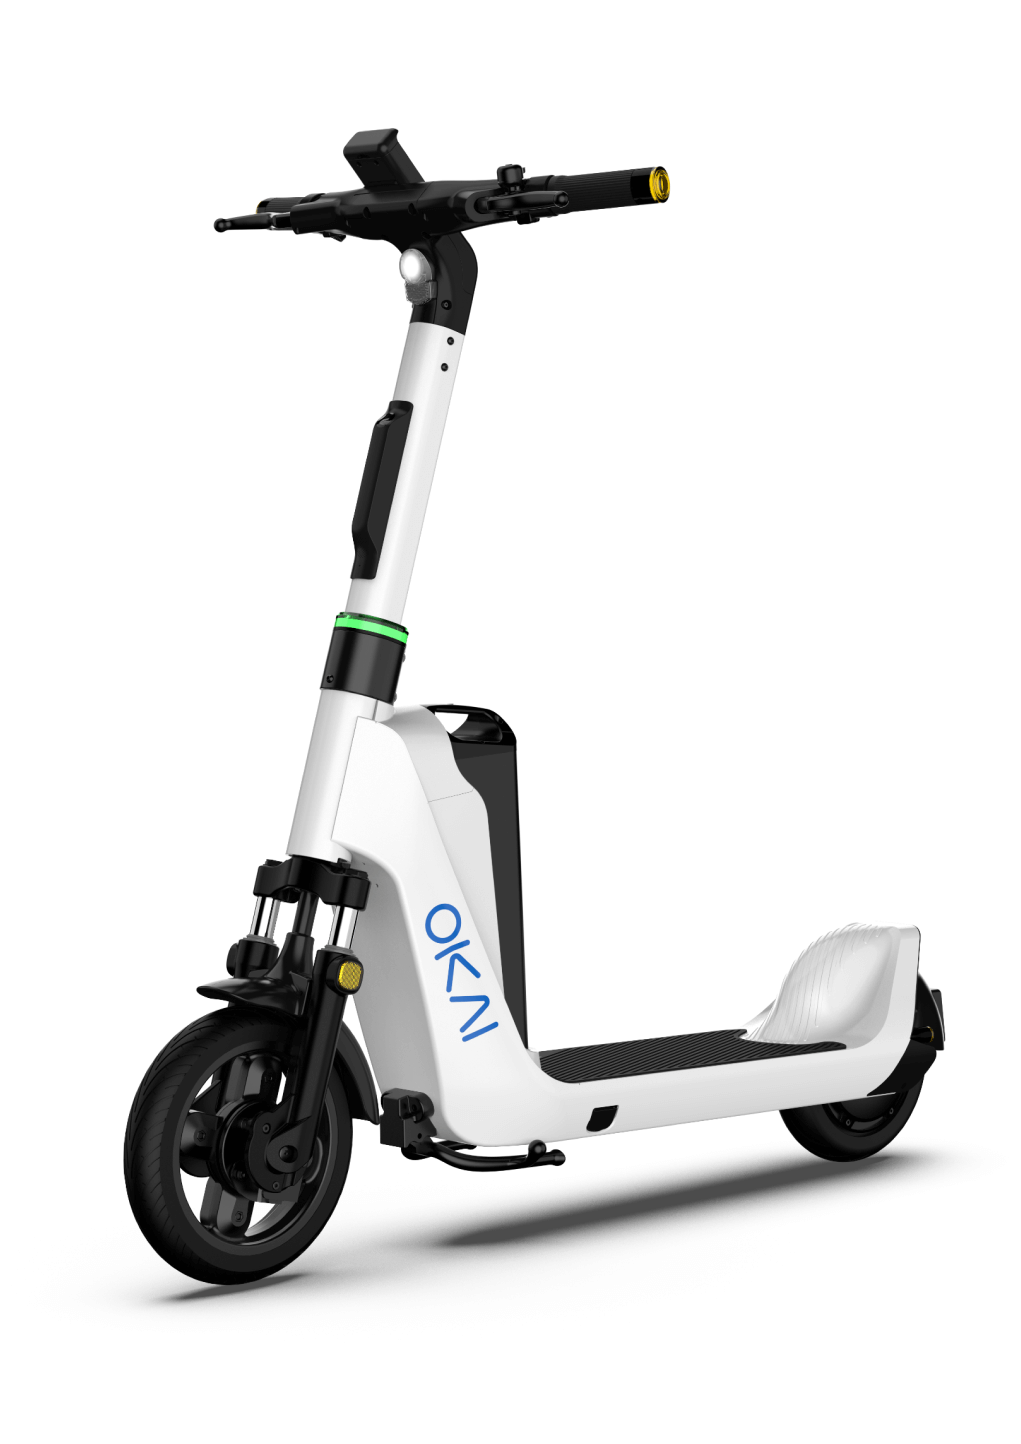 Okai ES600 sharing electric scooter